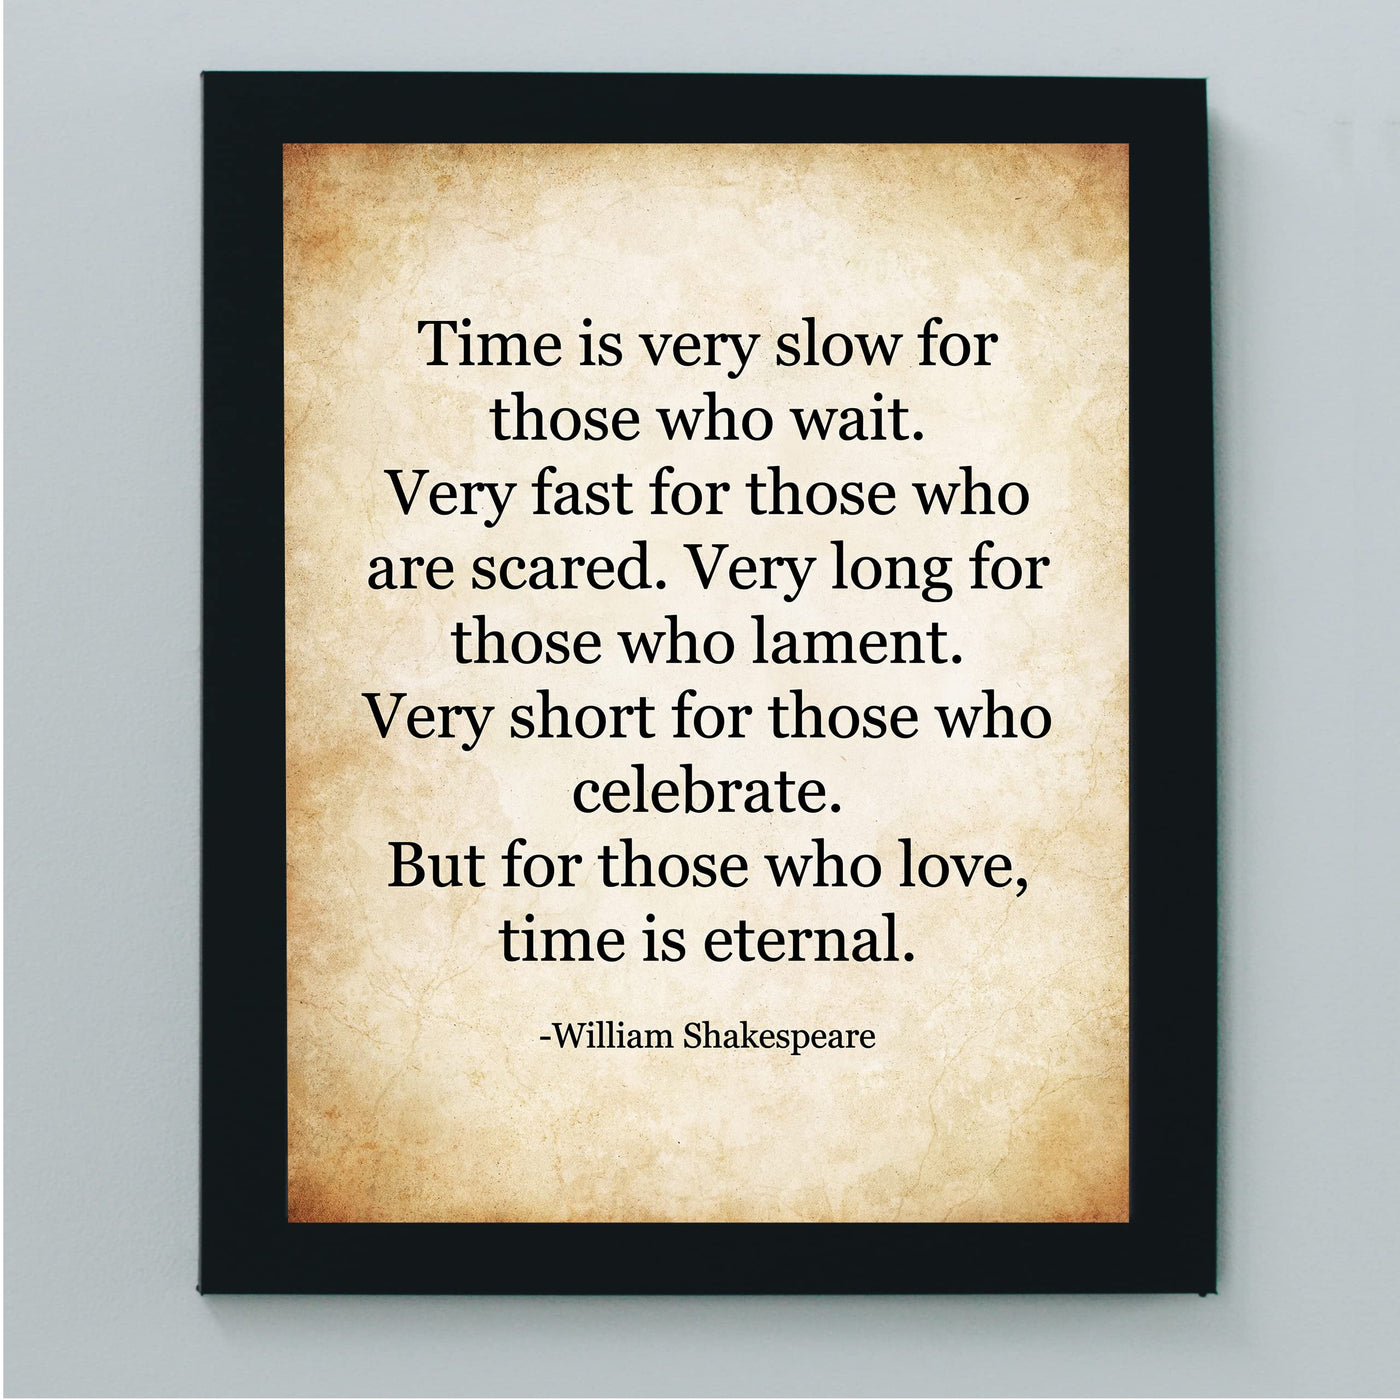 William Shakespeare-"For Those Who Love, Time Is Eternal" Famous Quotes -8 x 10" Inspirational Literary Wall Art. Vintage Poetry Print -Ready to Frame. Perfect Home-Office-Studio-Library Decor!